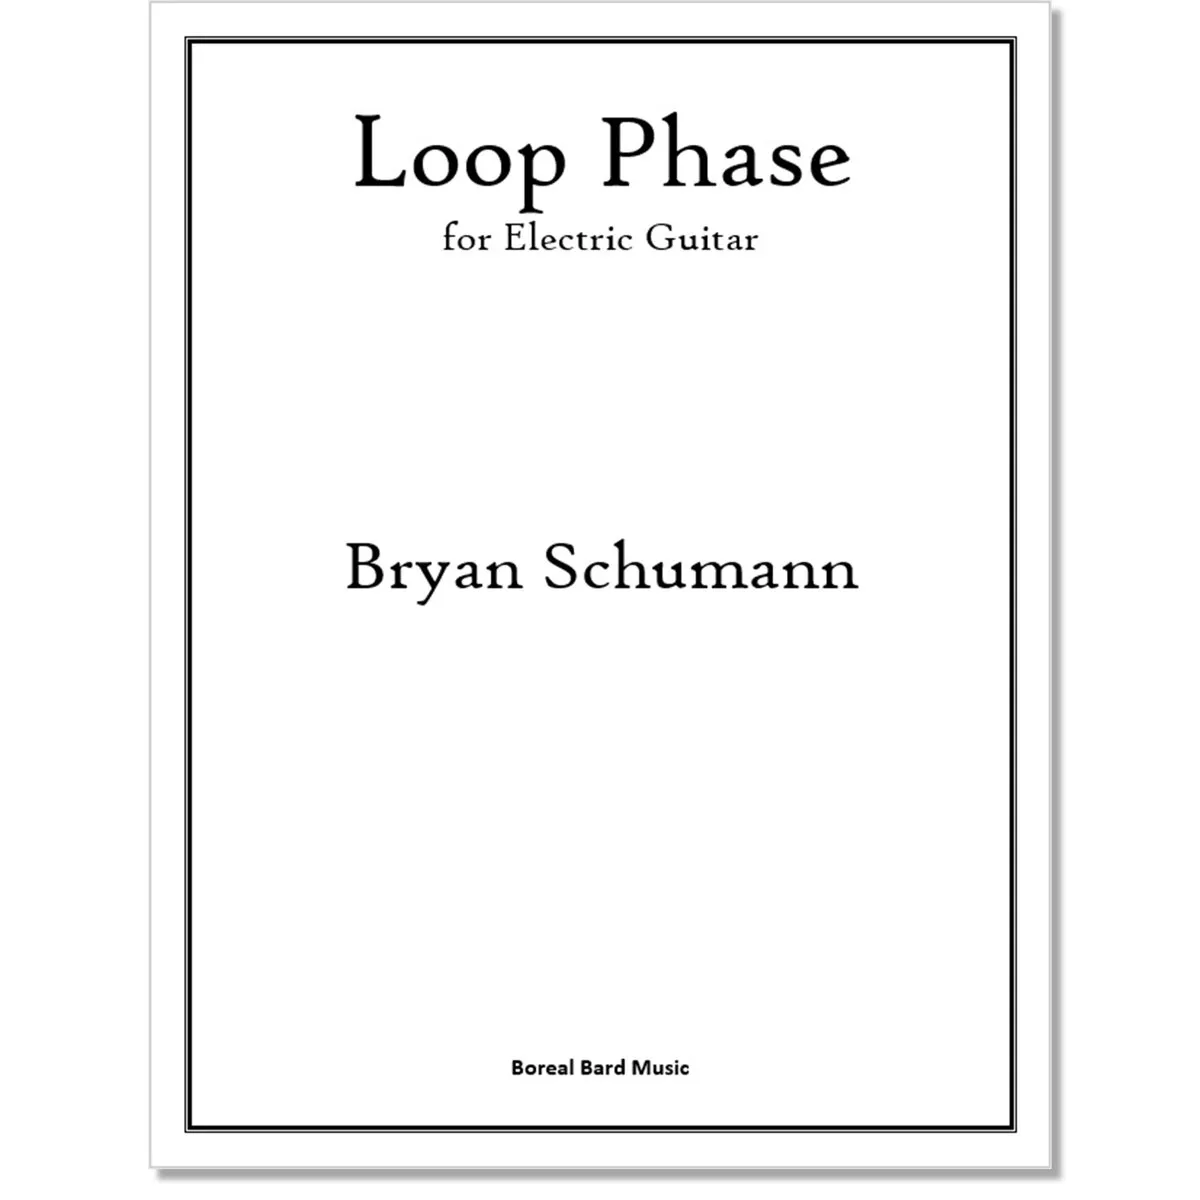 Loop Phase for Electric Guitar (sheet music)